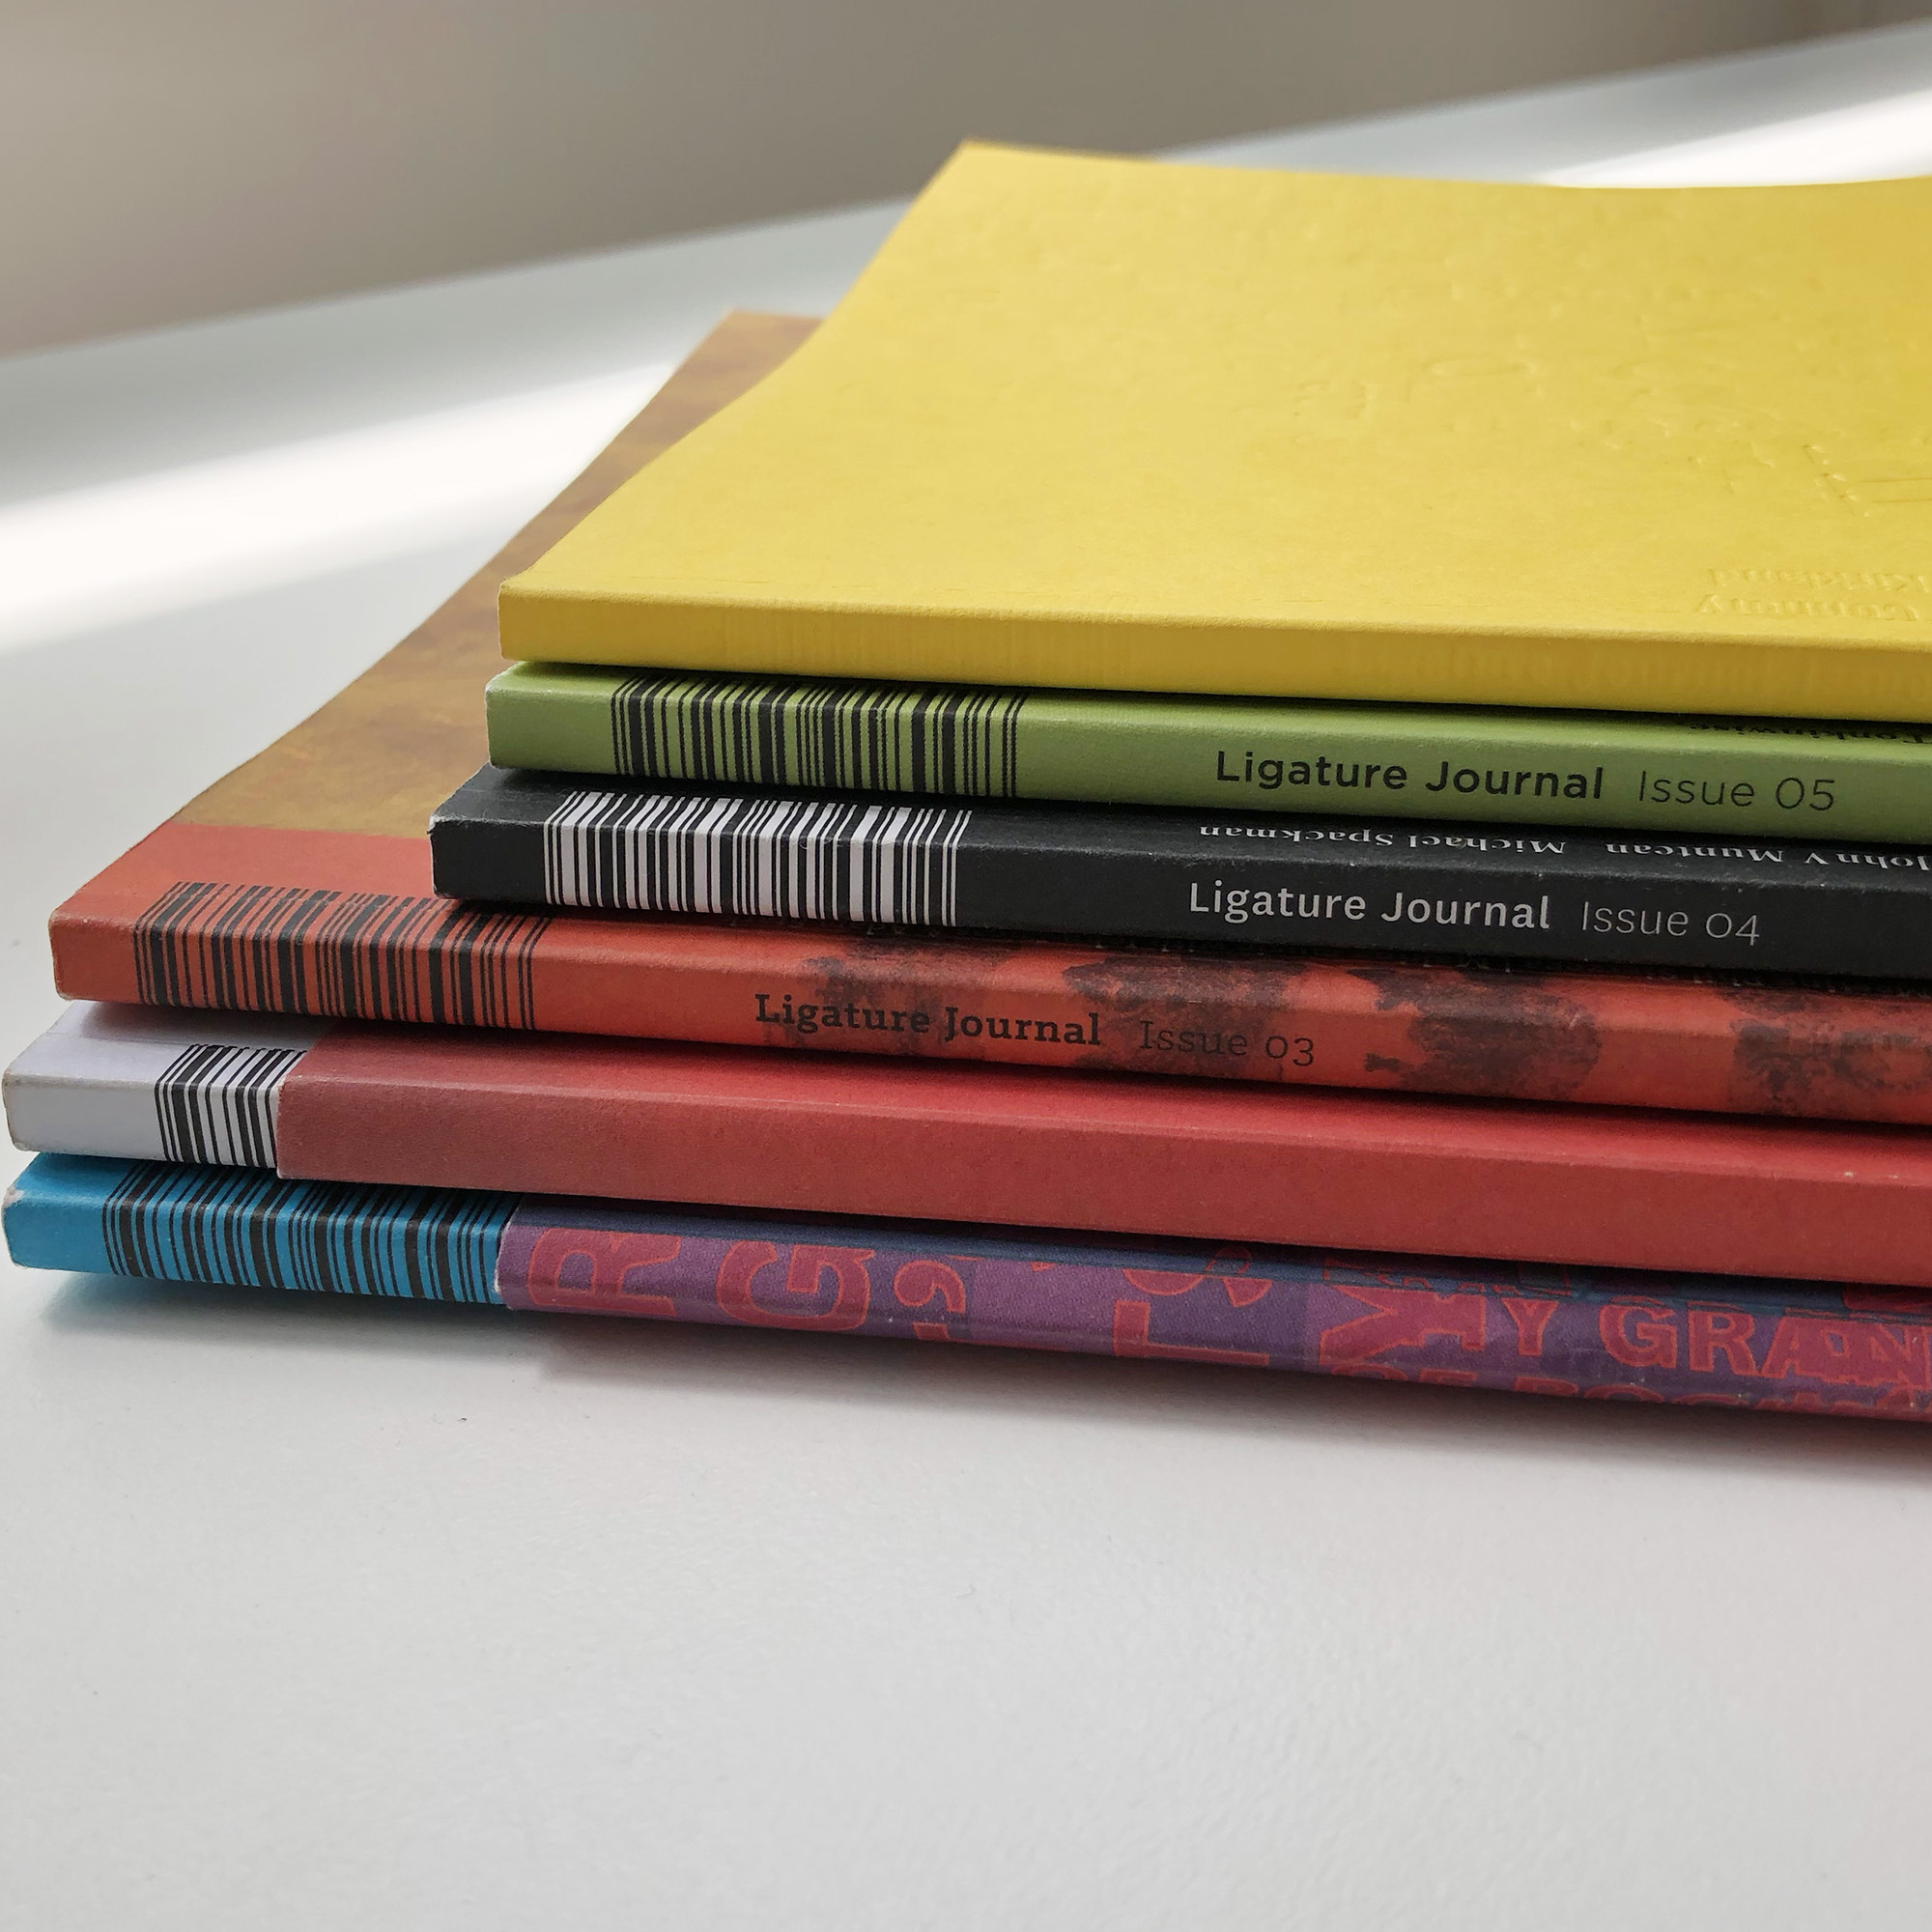 stack of Ligature journal Issues showing part of the magazine spine